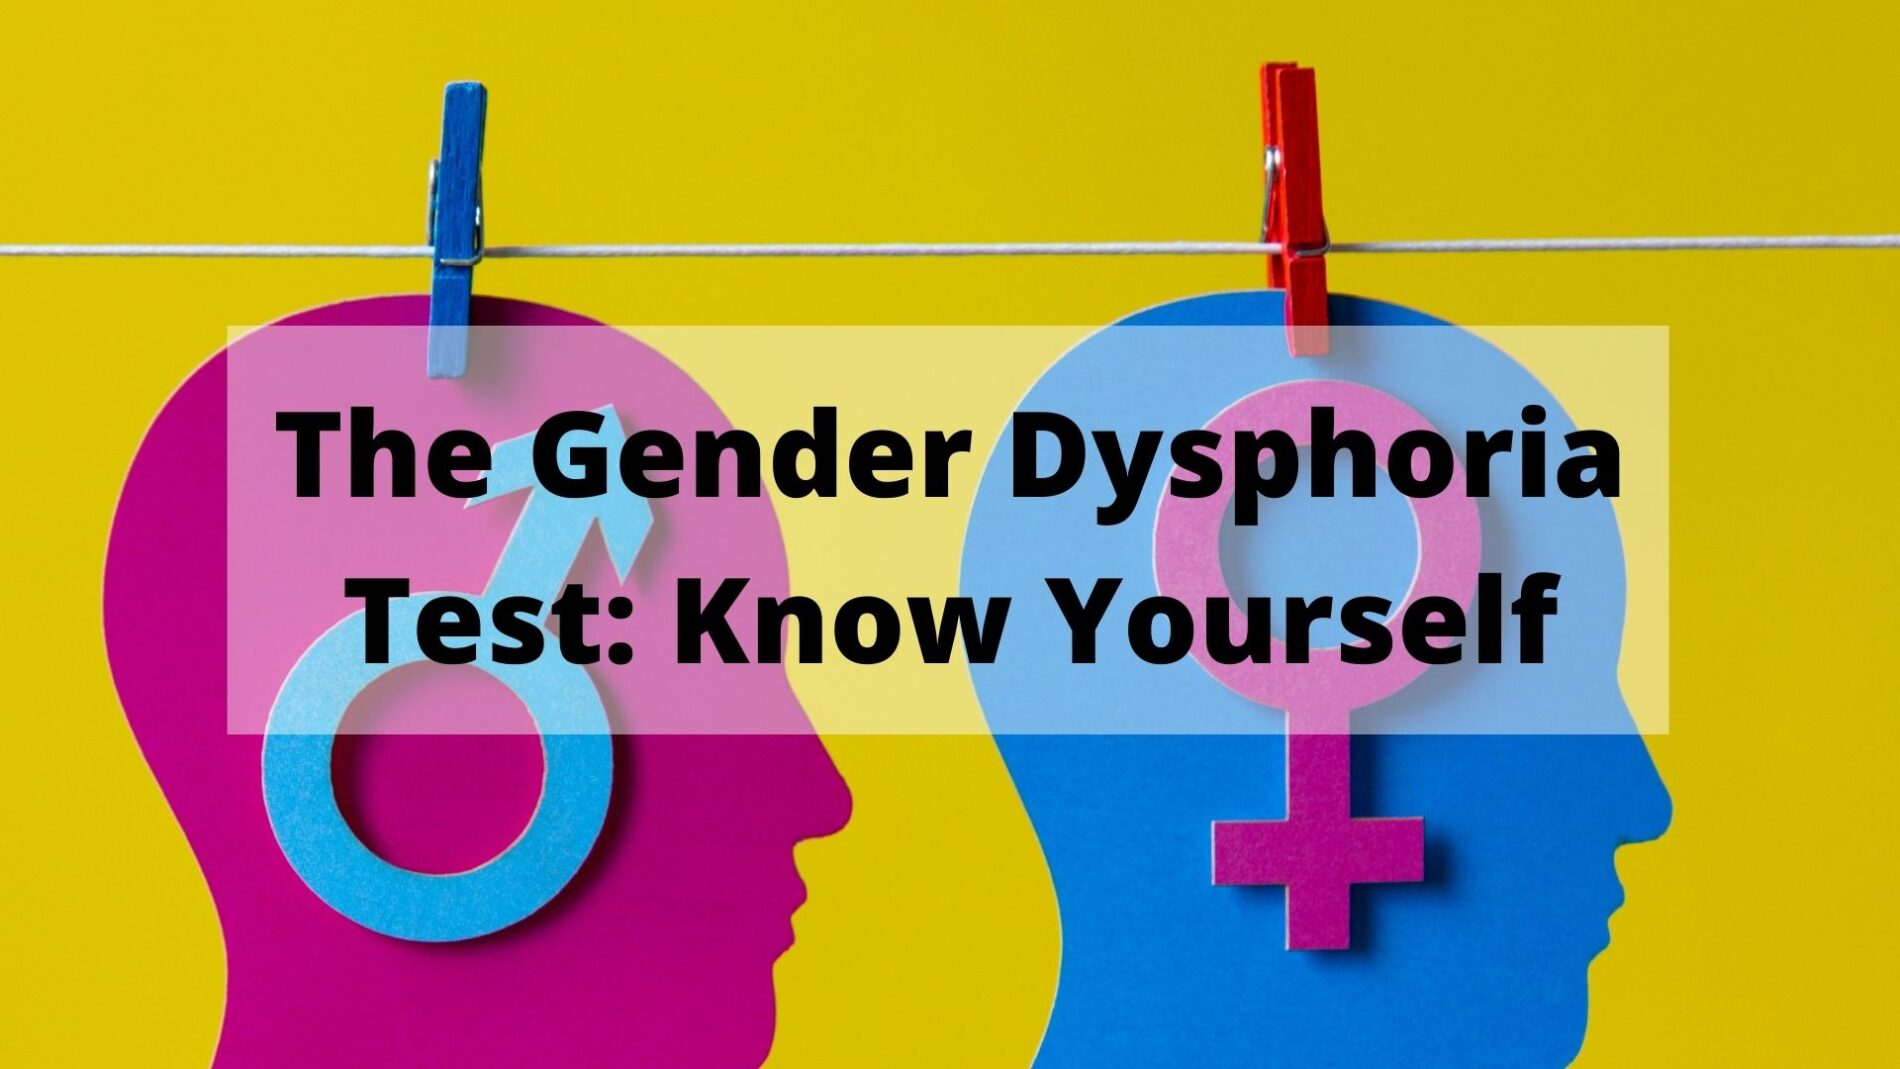 thesis about gender dysphoria